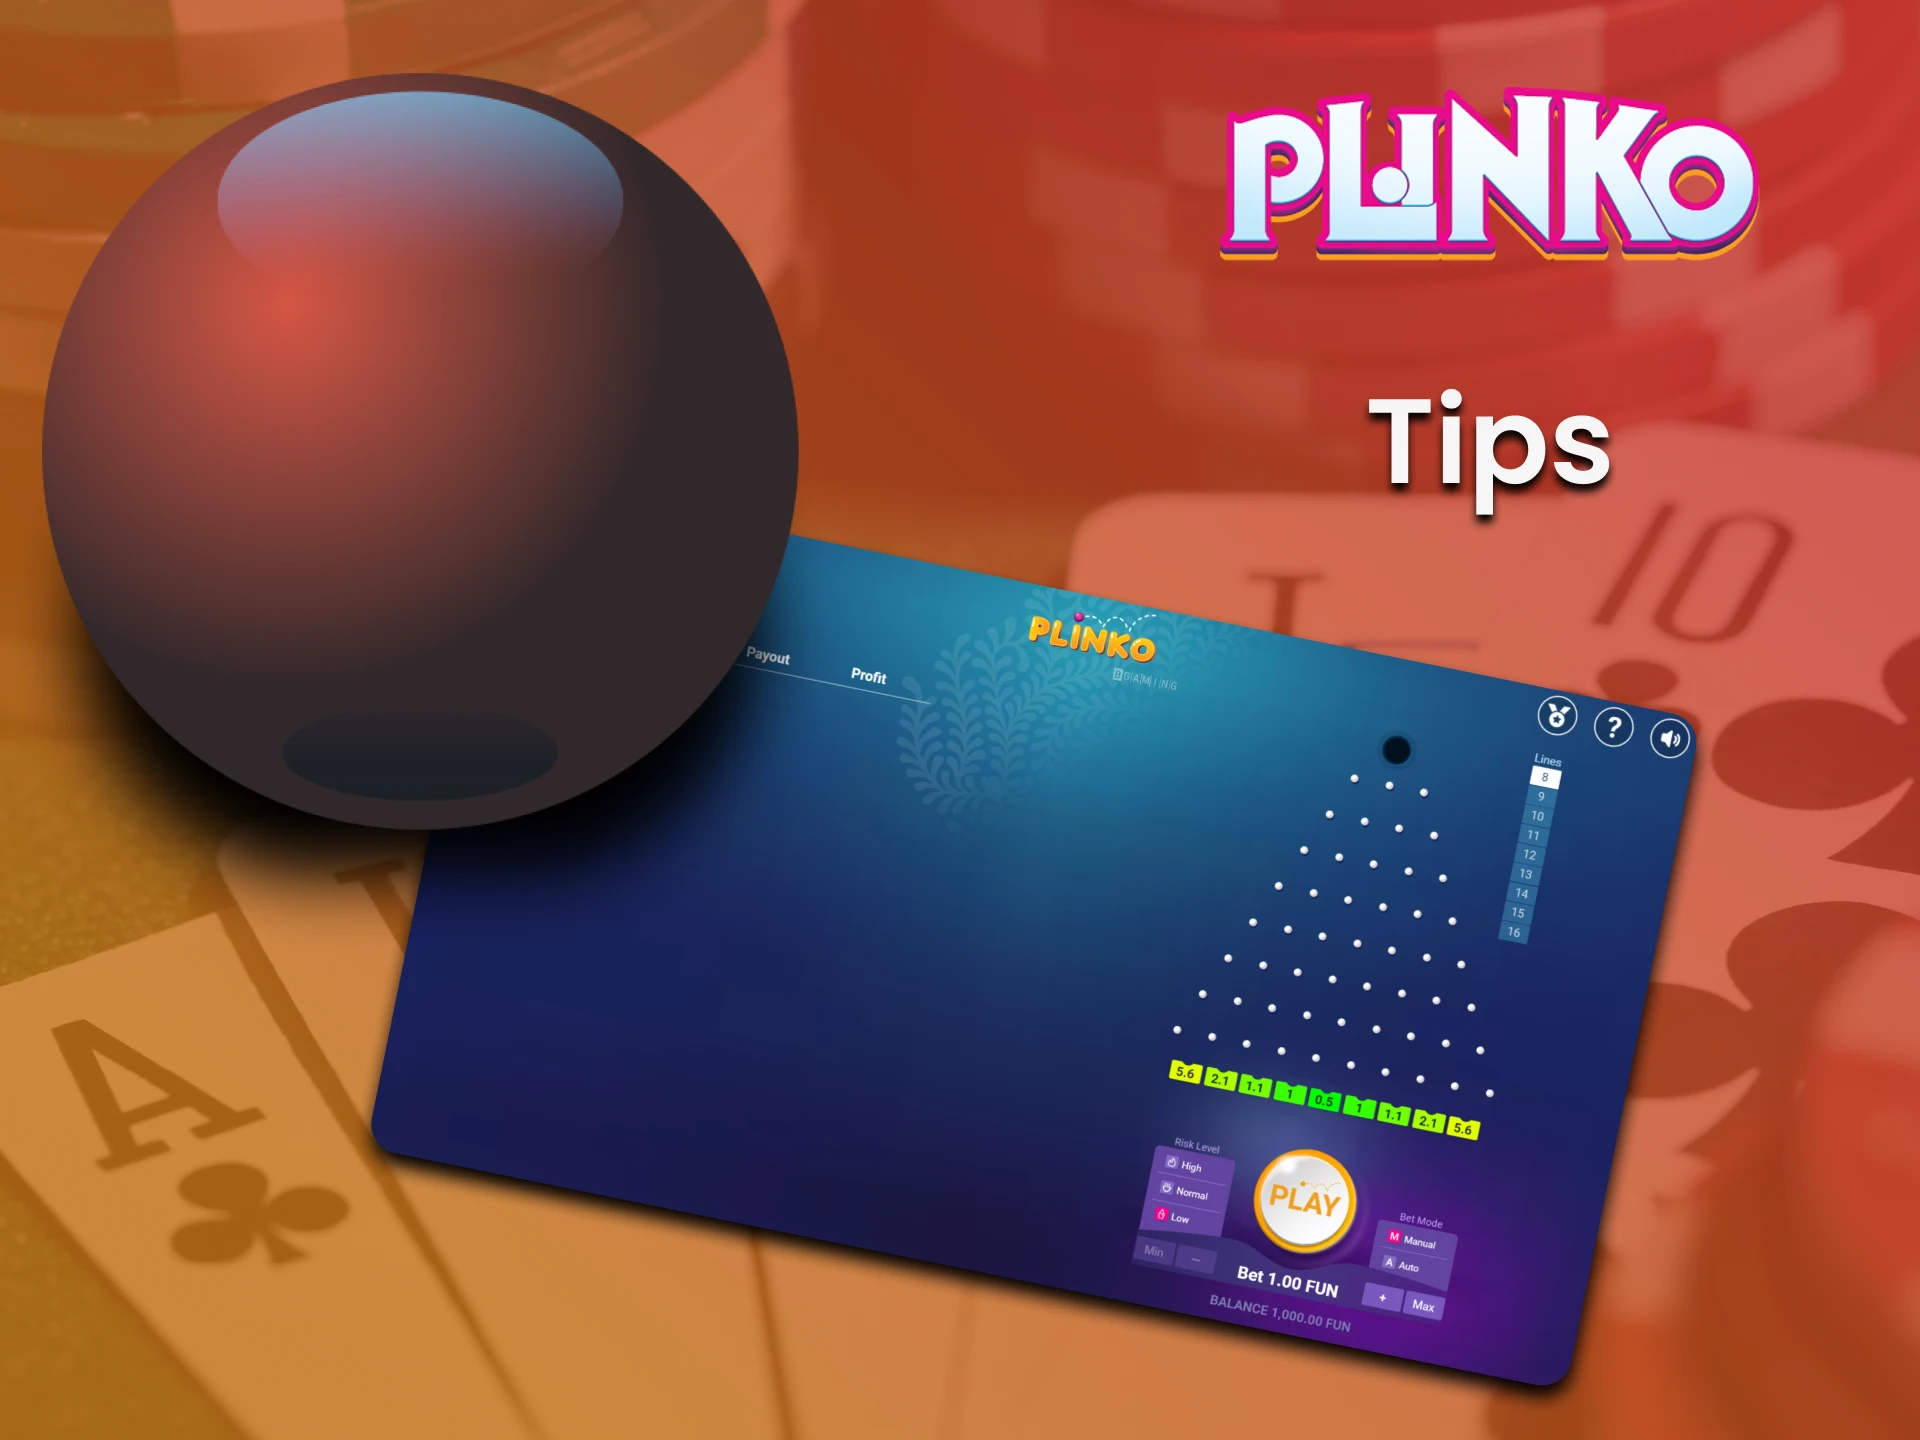 Learn all the possible tricks to win in Plinko.